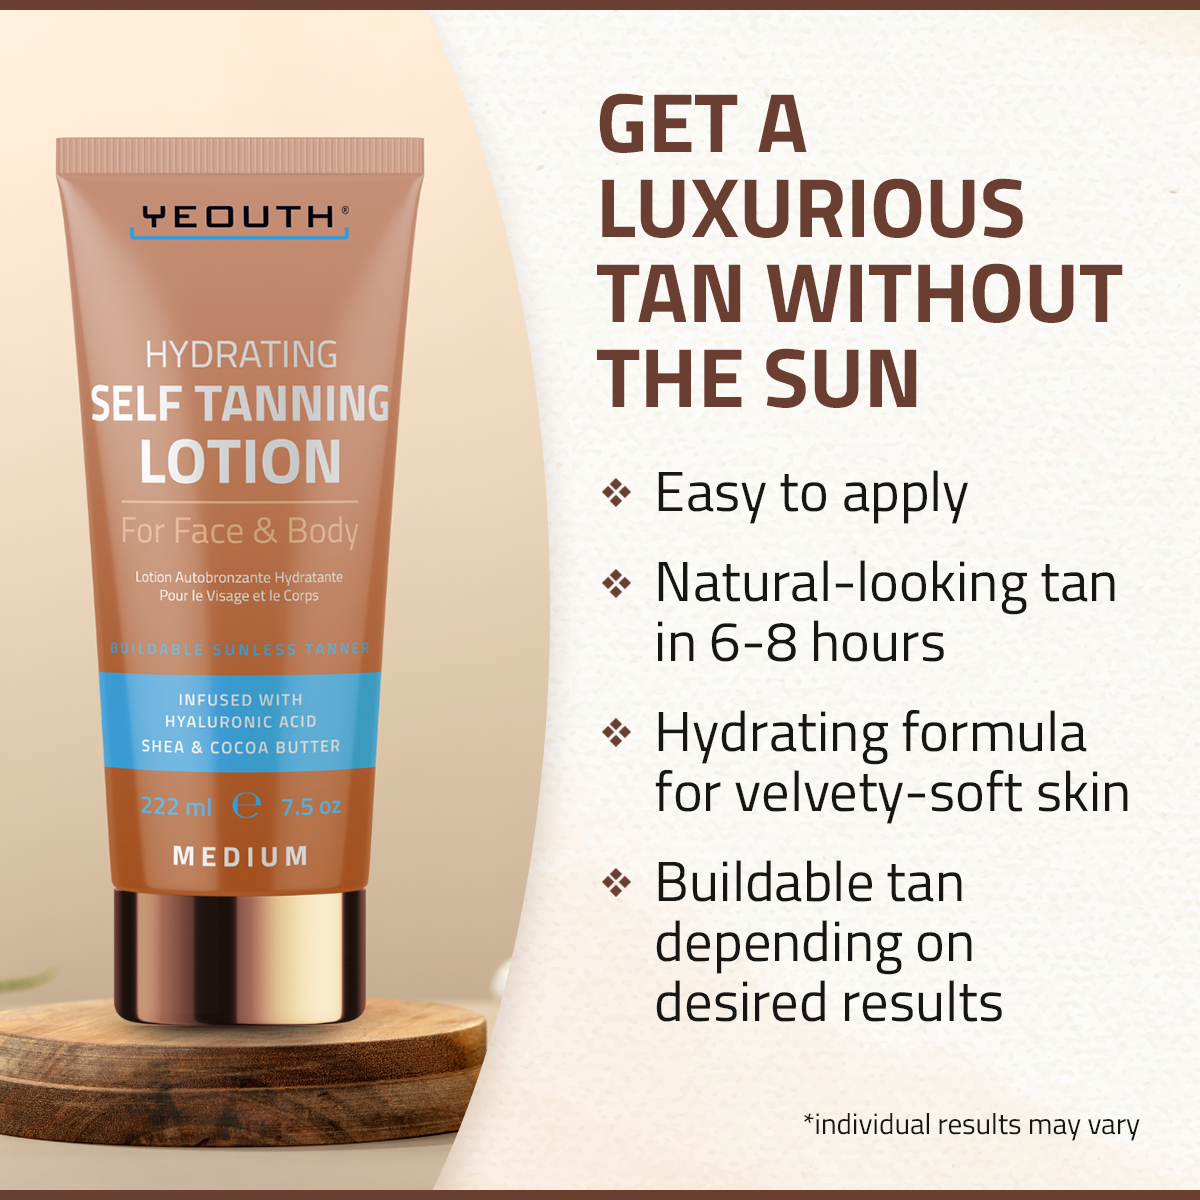 Hydrating Self Tanning Lotion for Face & Body